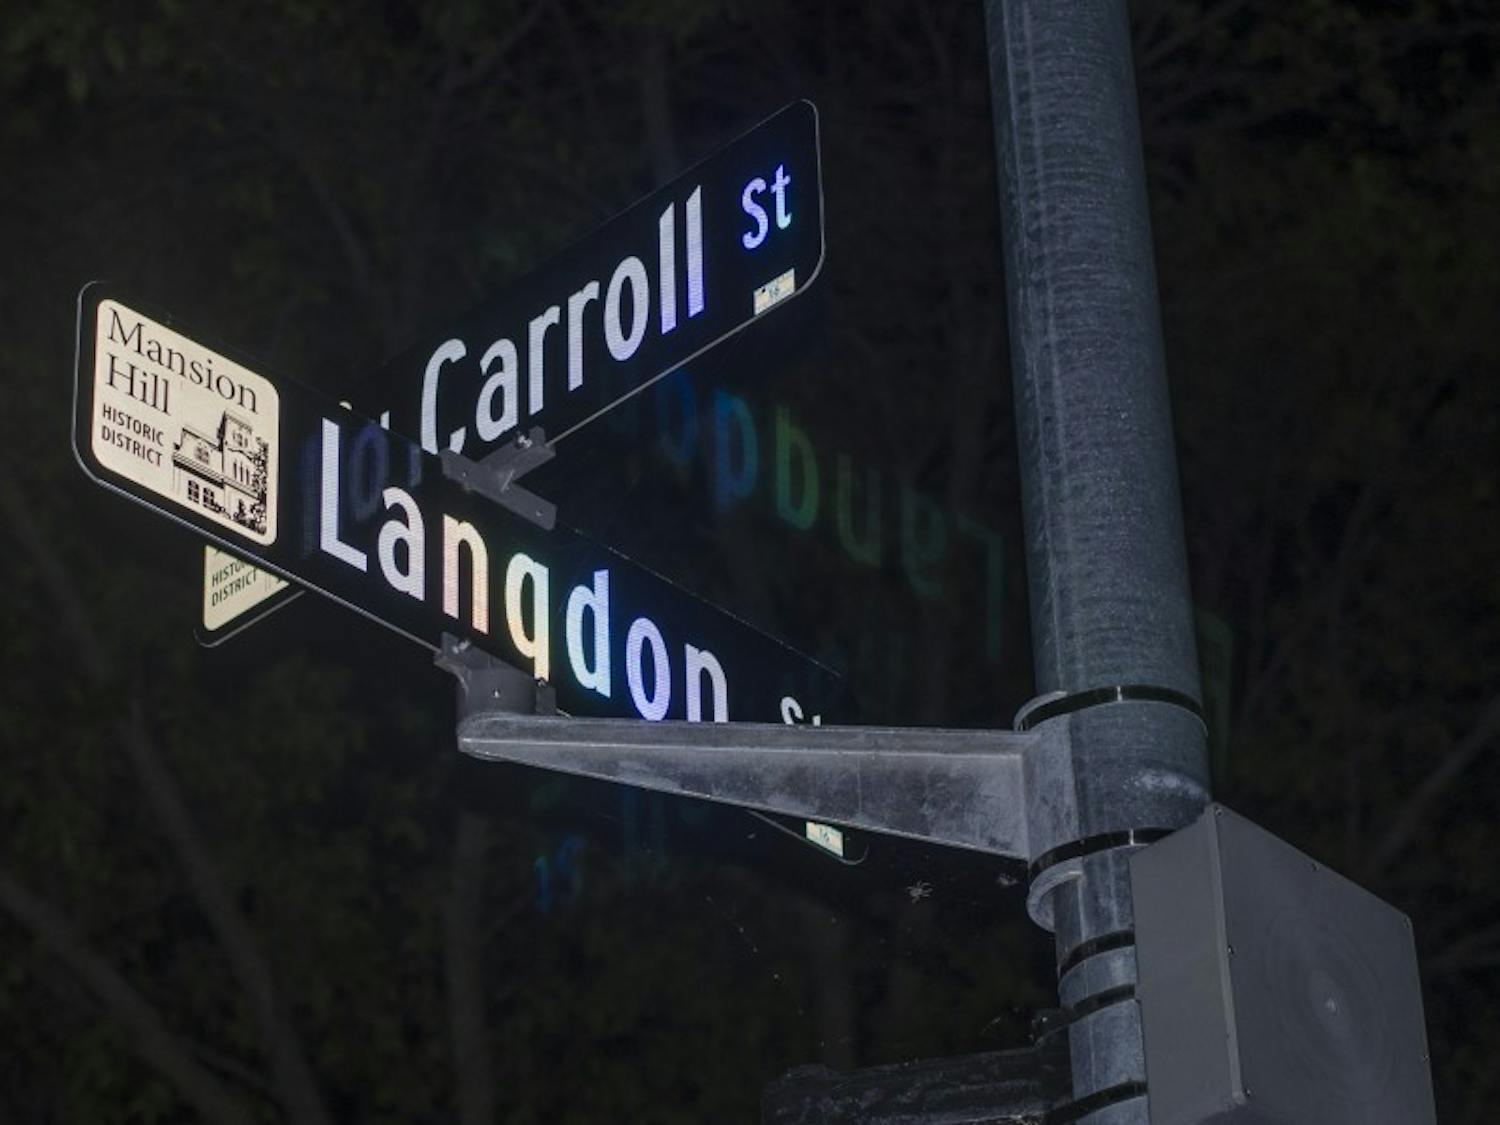 An unidentified man grabbed a woman’s neck on Carroll Street early Saturday morning. Her “screams were sufficient to cause the attacker to flee,” according to an MPD incident report.